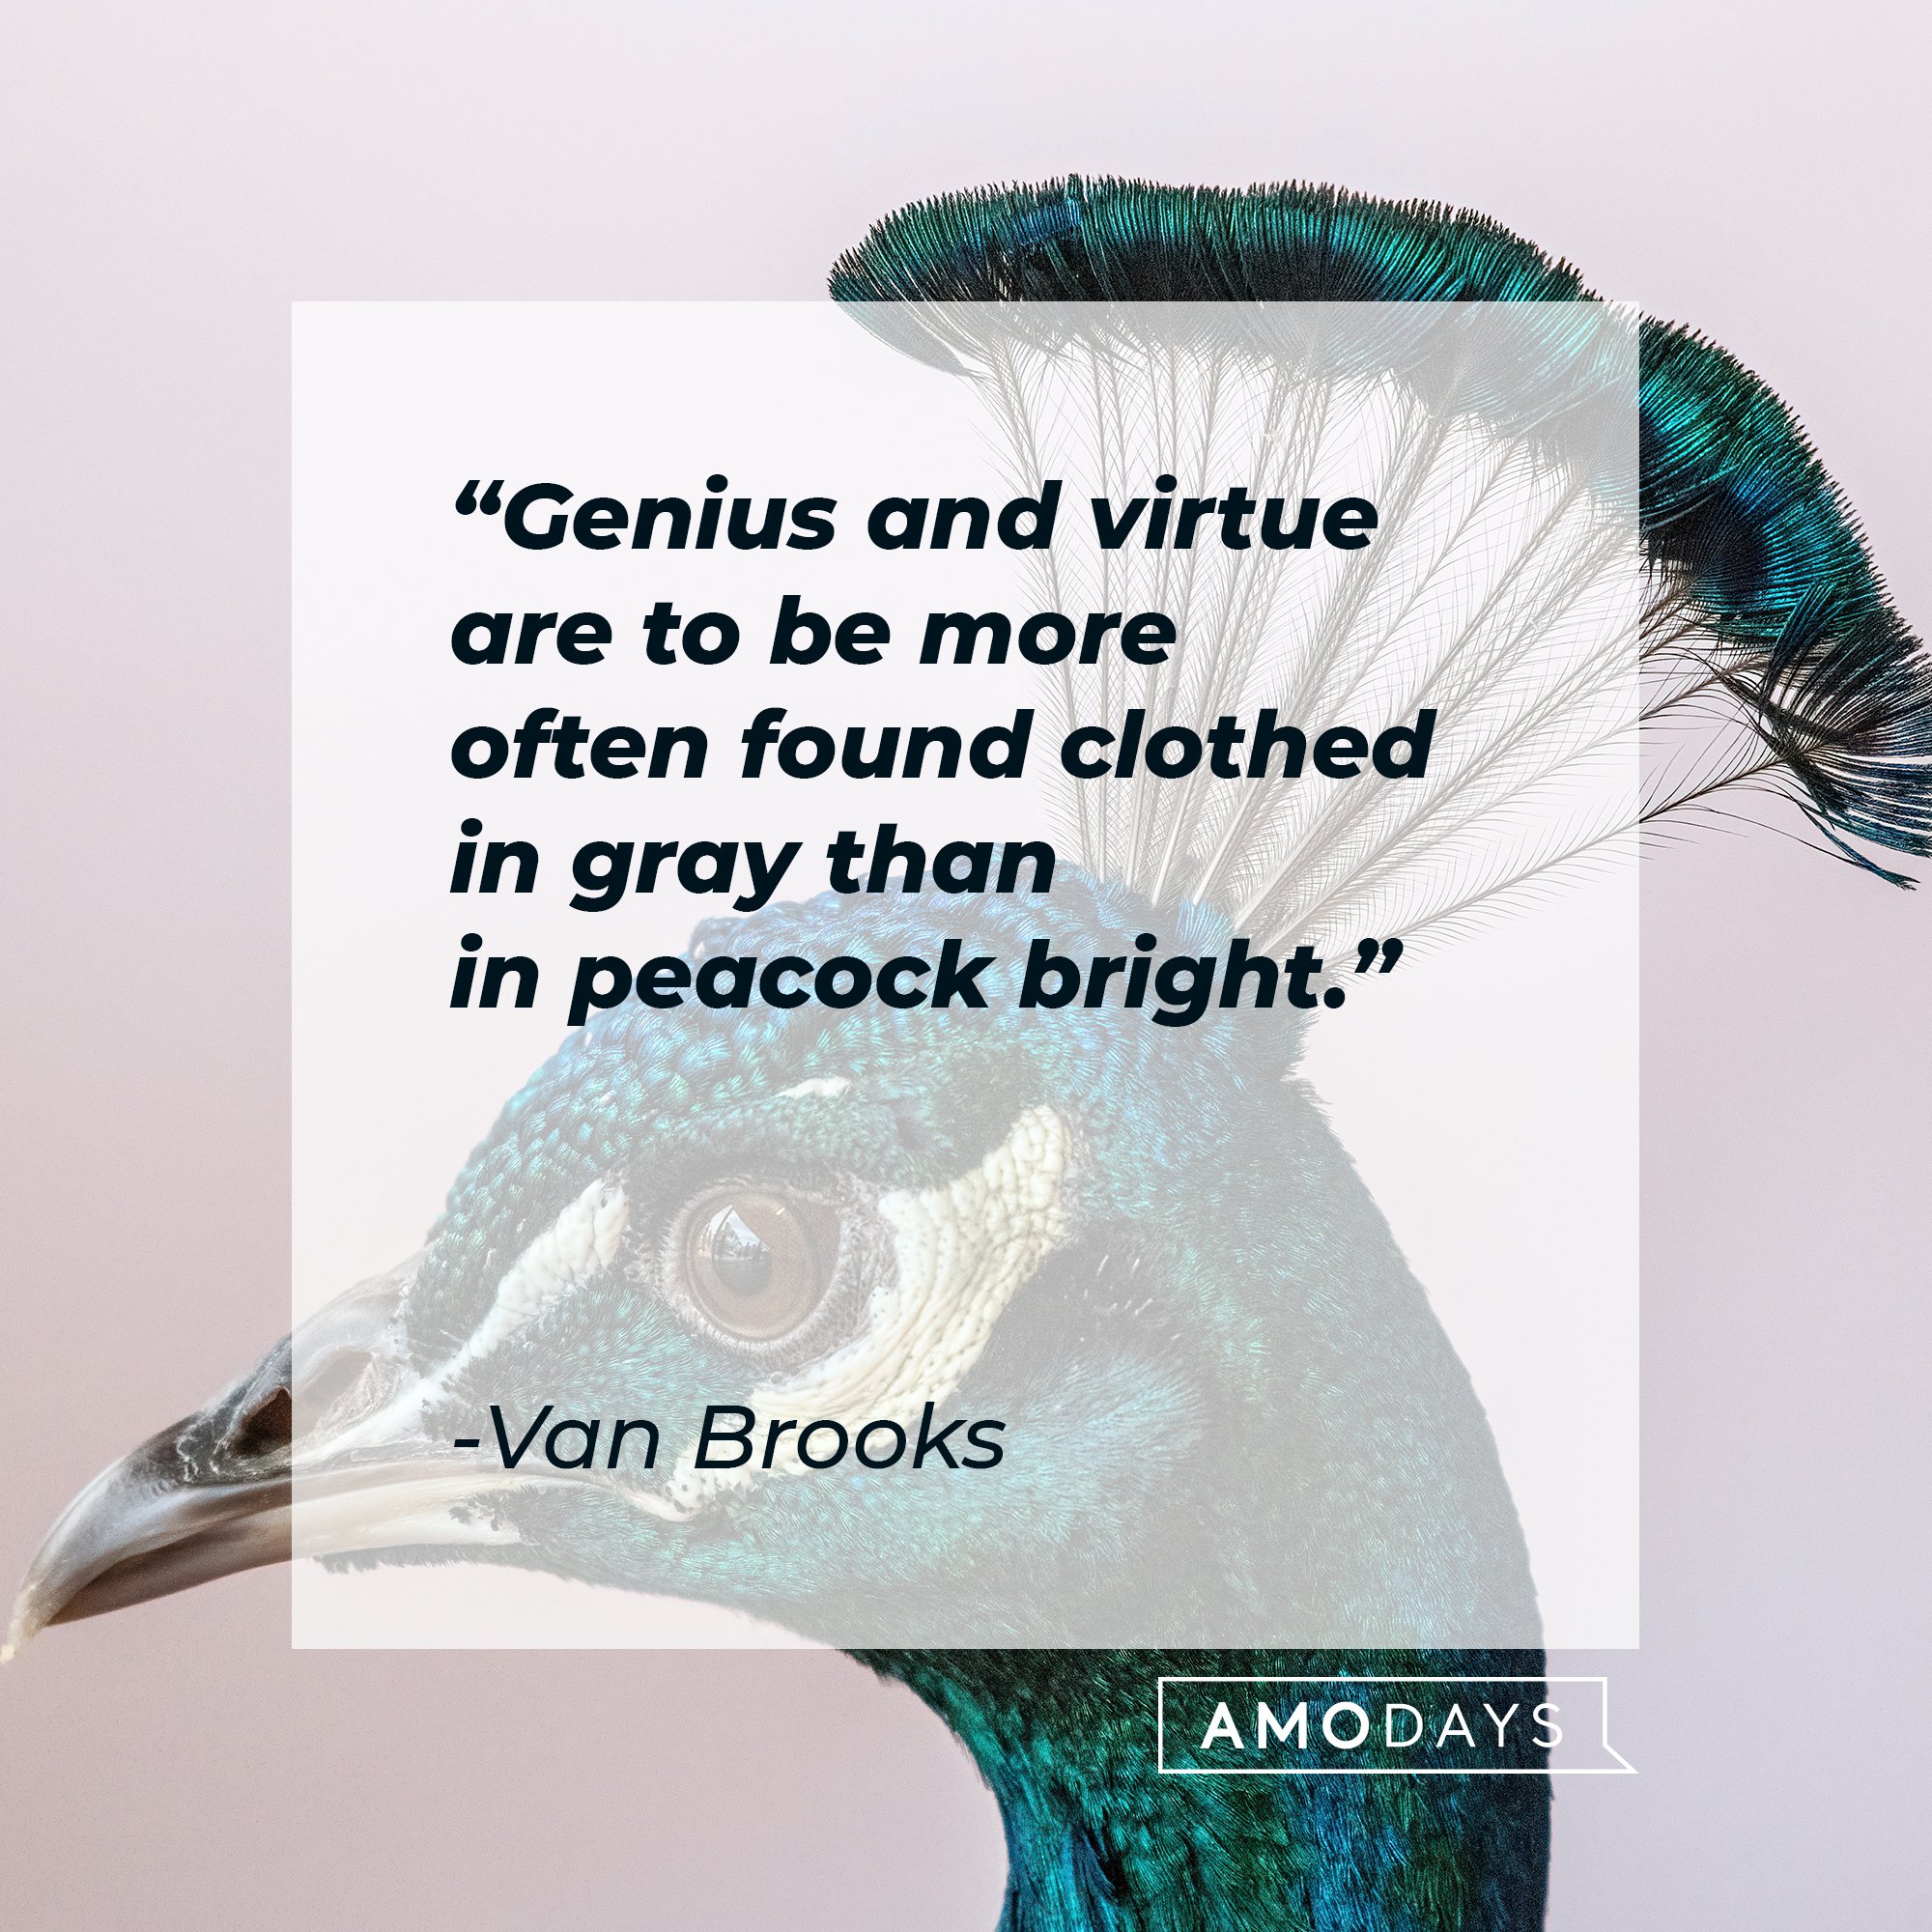 Van Brooks’ quote: "Genius and virtue are to be more often found clothed in gray than in peacock bright." | Image: AmoDays